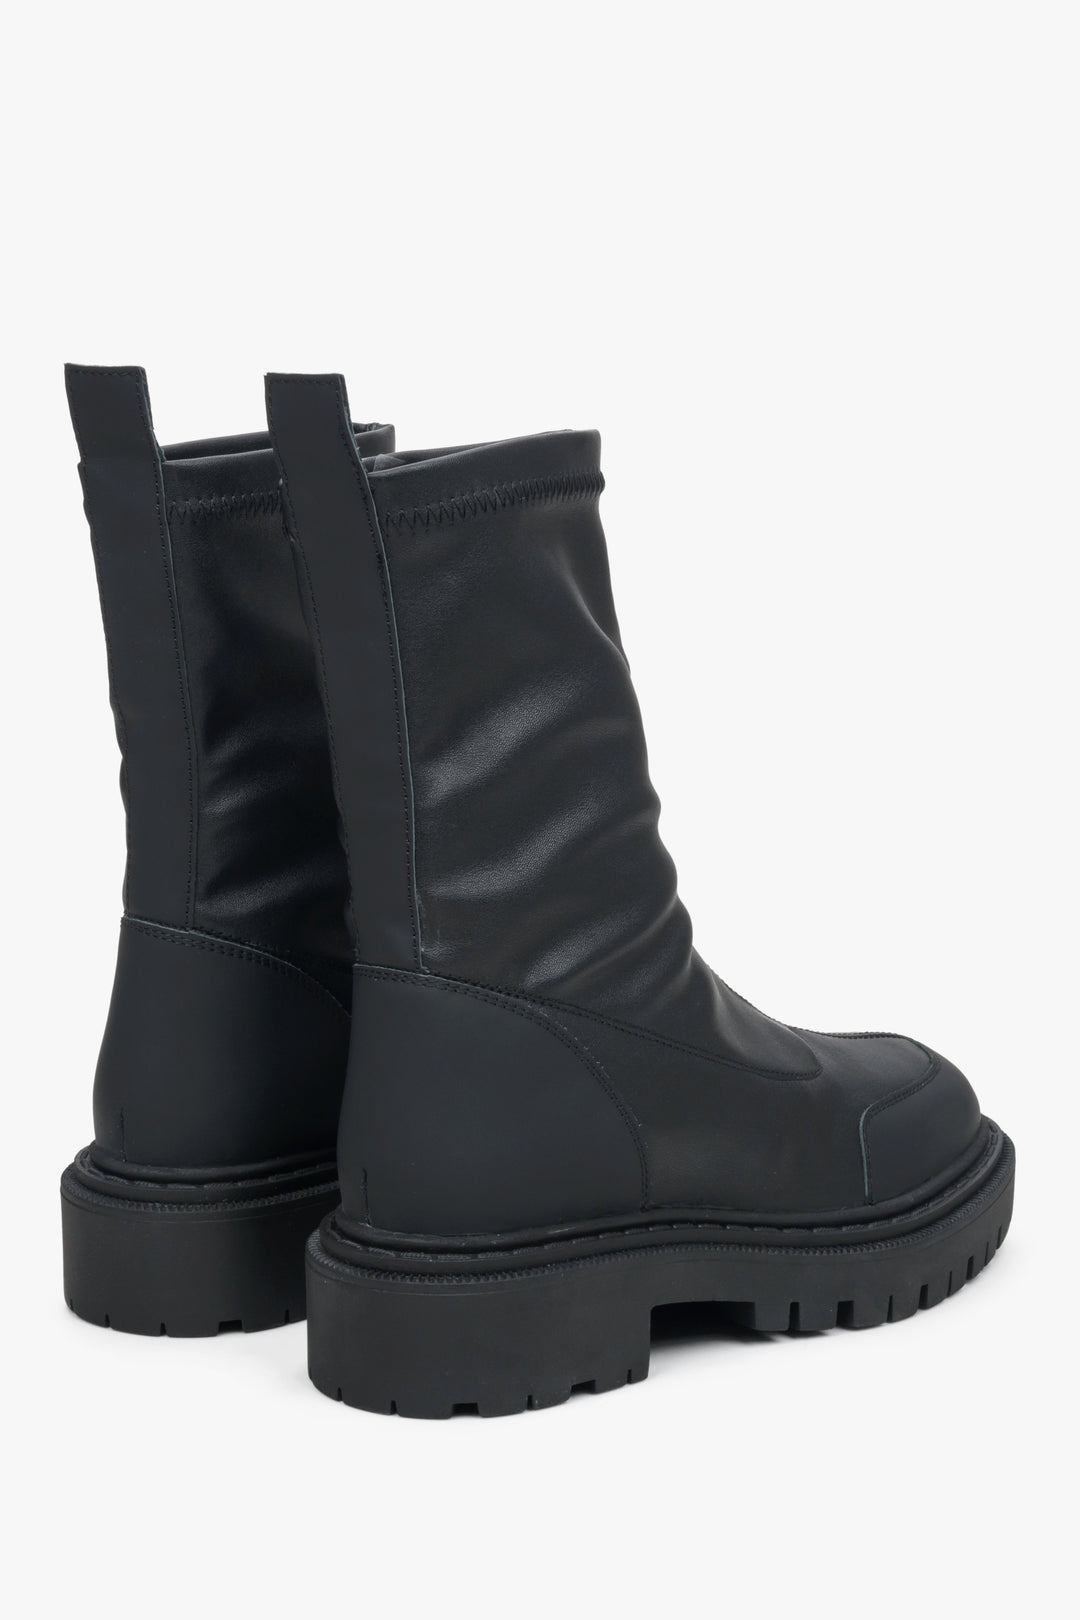 Black leather women's ankle boots with a flexible upper by Estro.